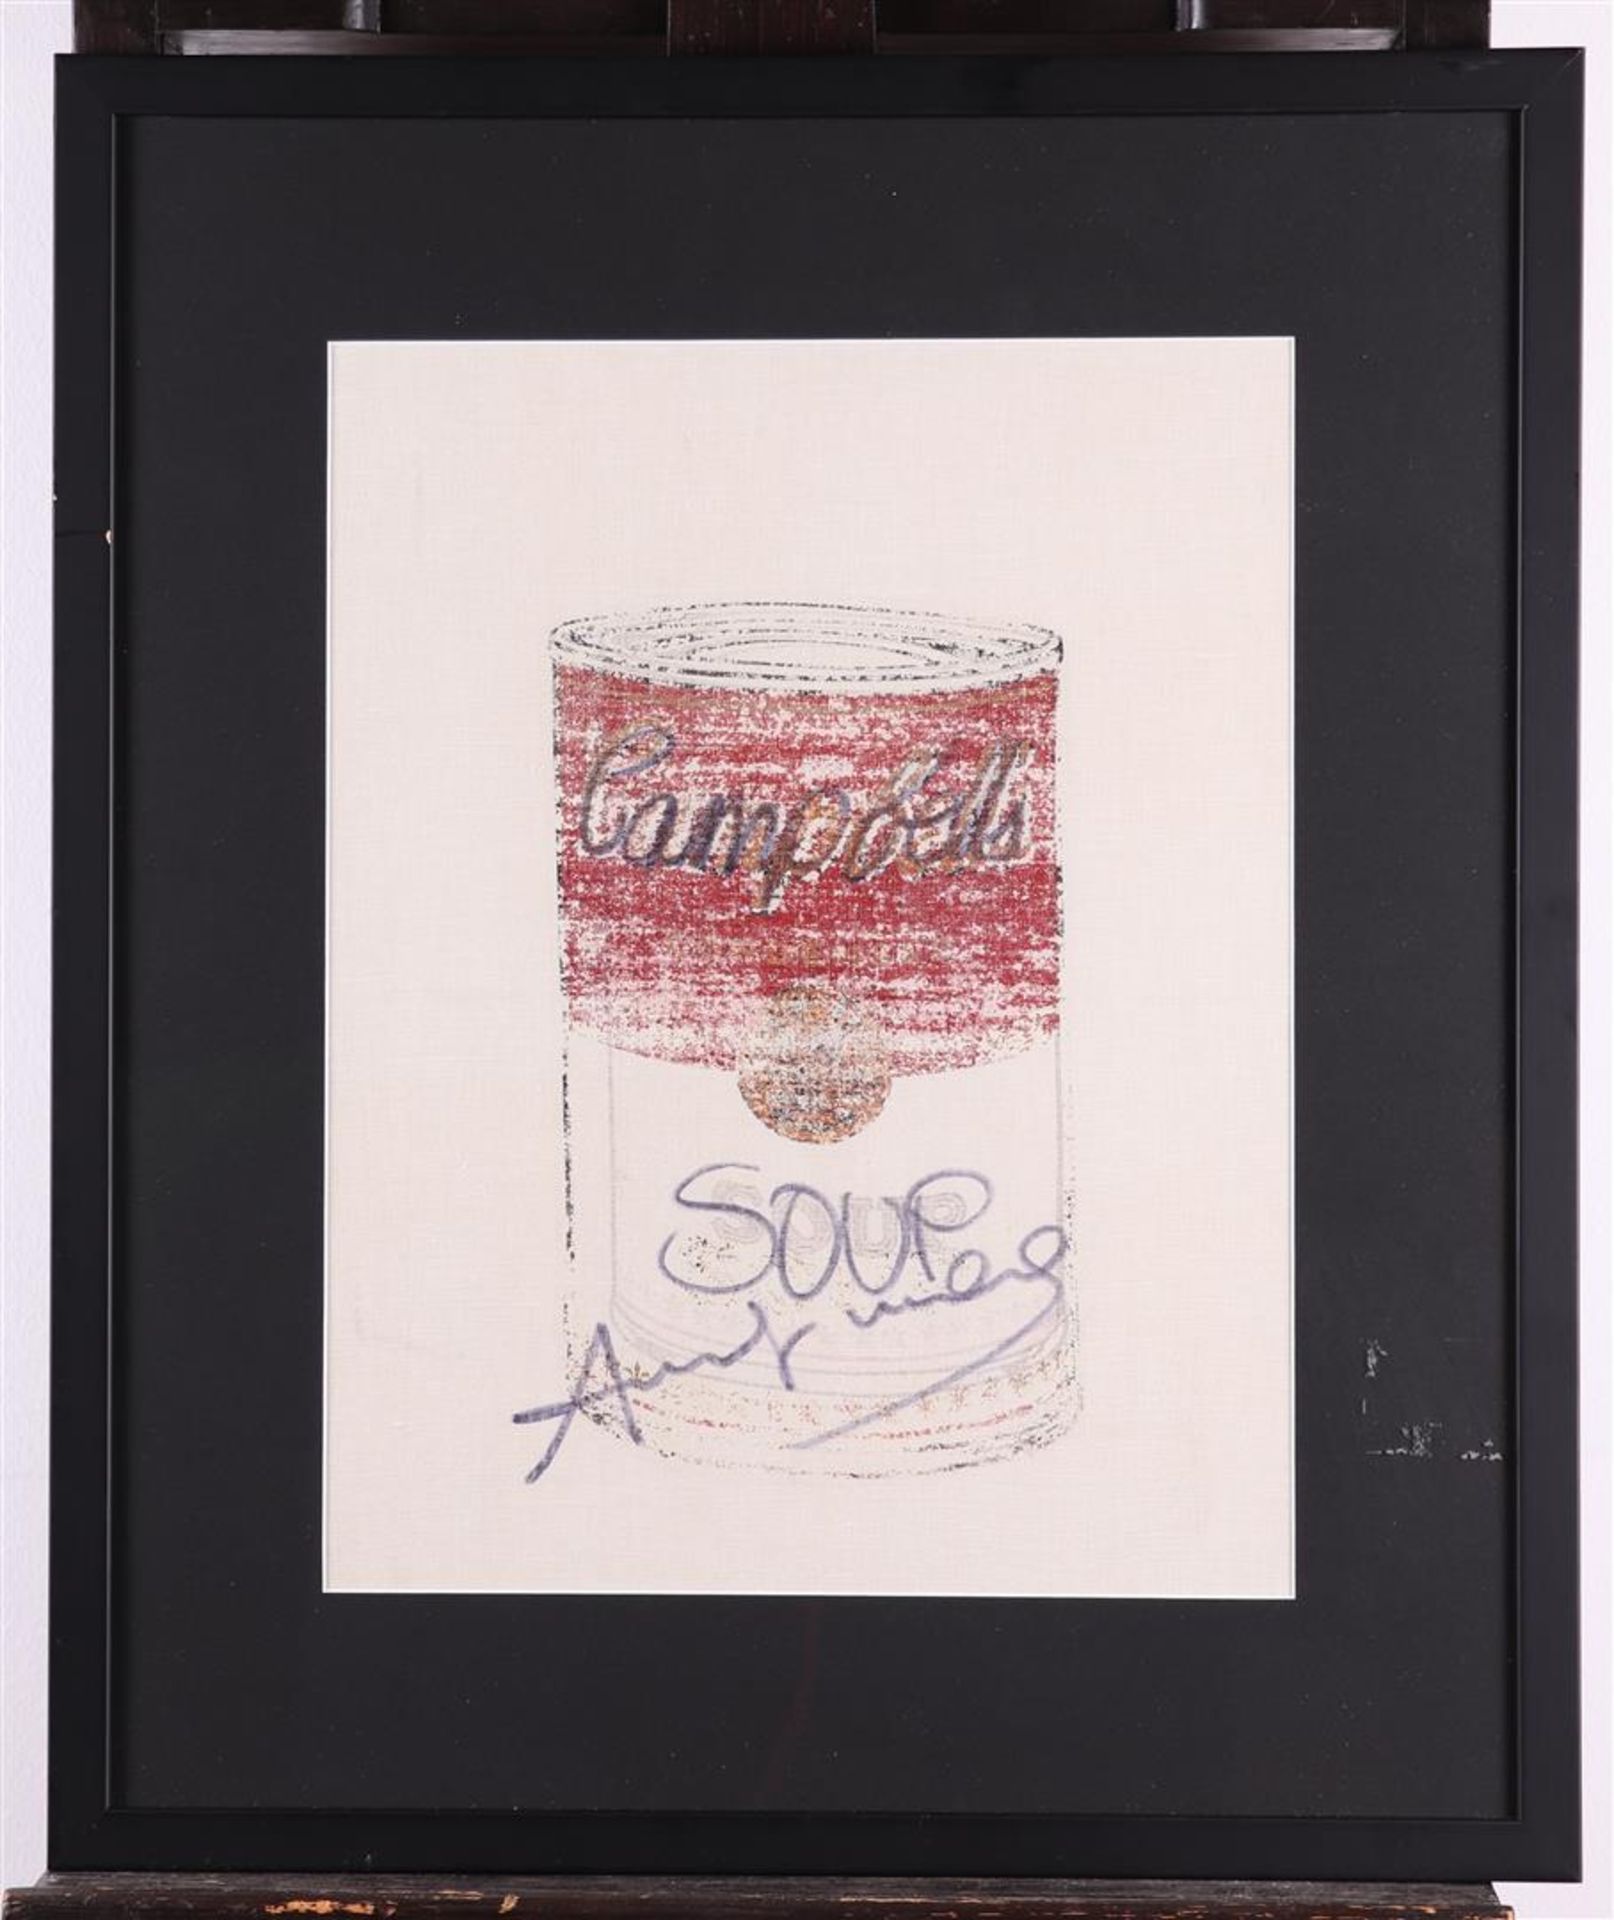 Andy Warhol (Pittsburgh, Pennsylvania, 1928 - 1987 New York Presbyterian), (after), Cambell's Soup,